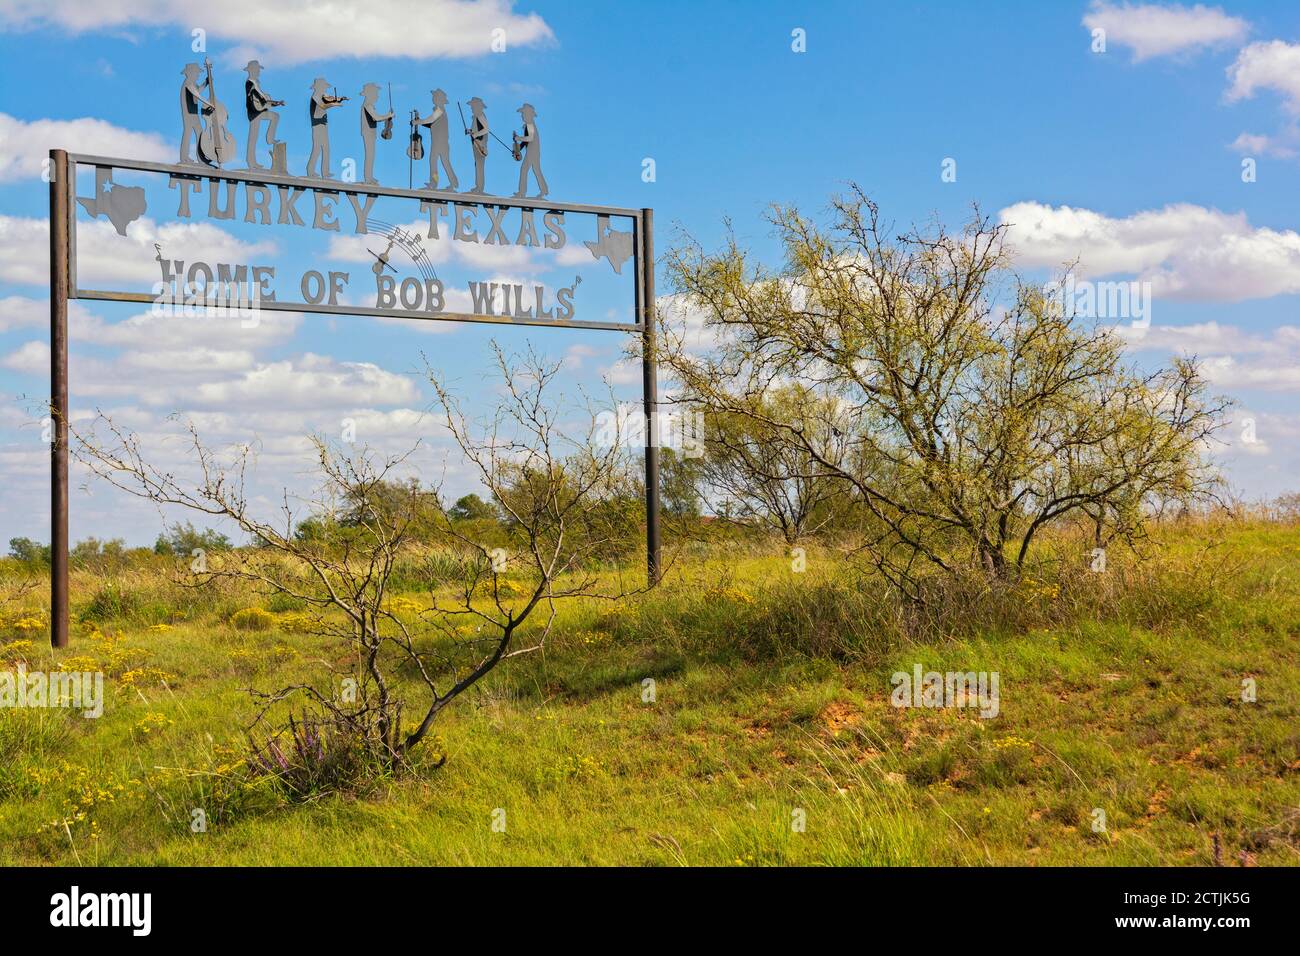 Texas, Hall County, Turkey, Home of Bob Wills, welcome sign Stock Photo